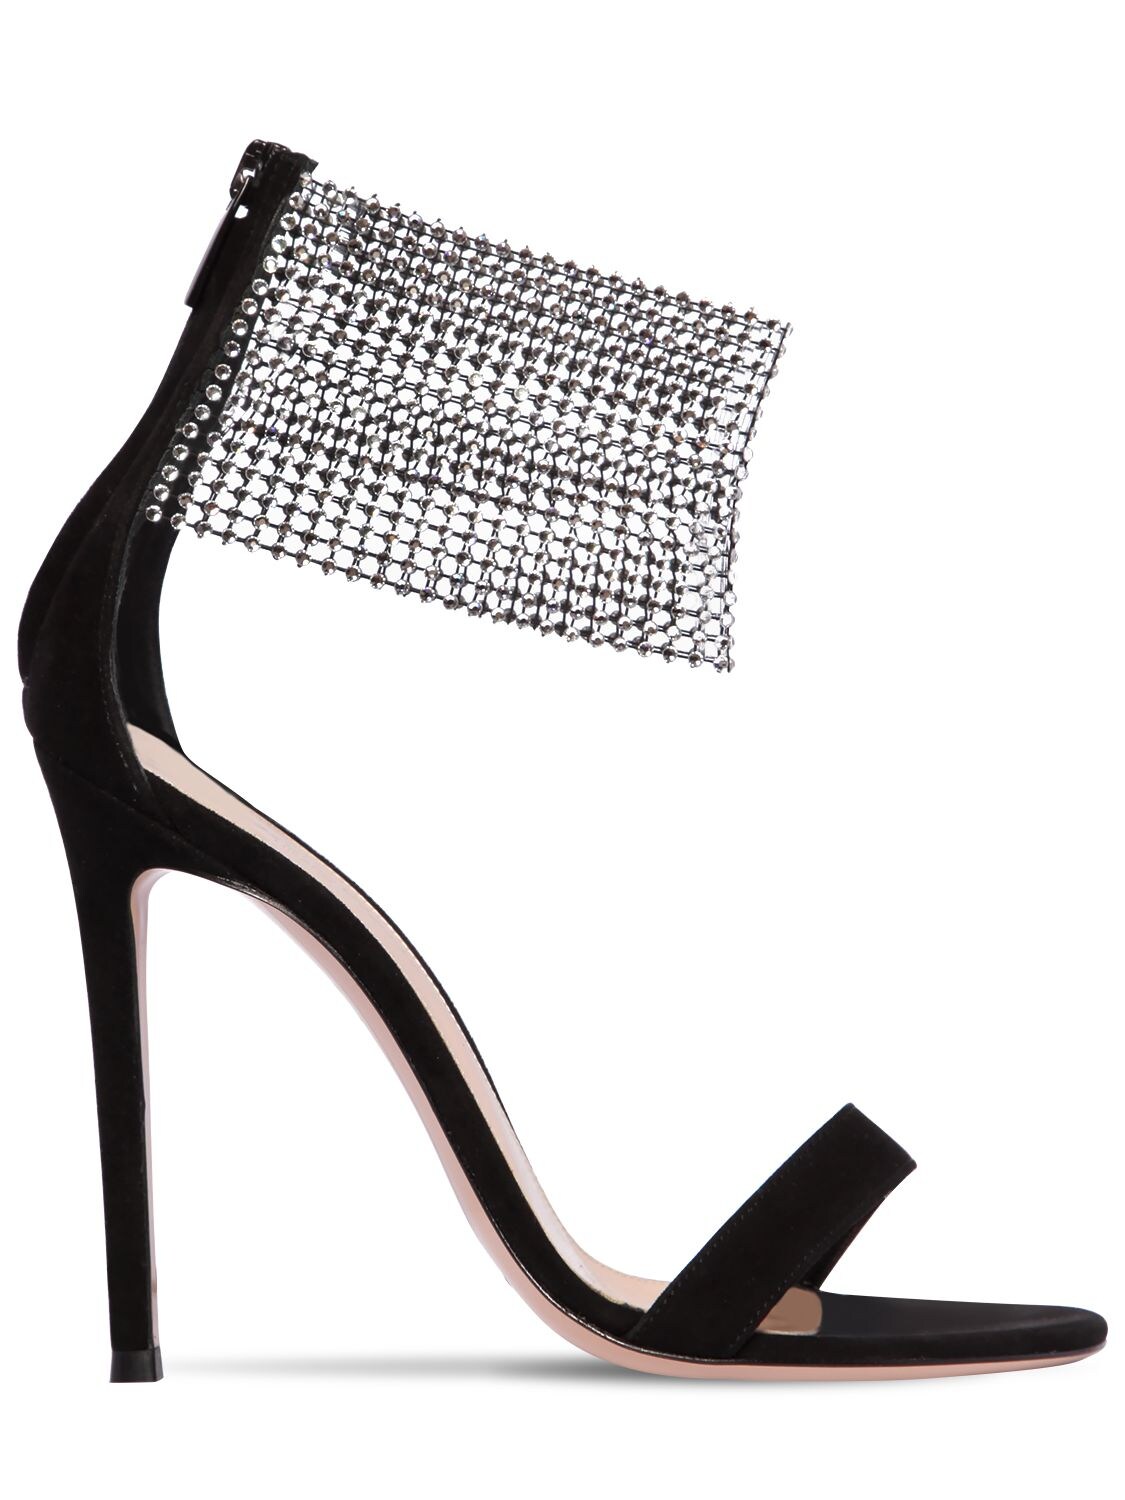 Gianvito Rossi 105mm Embellished Suede Sandals In Black